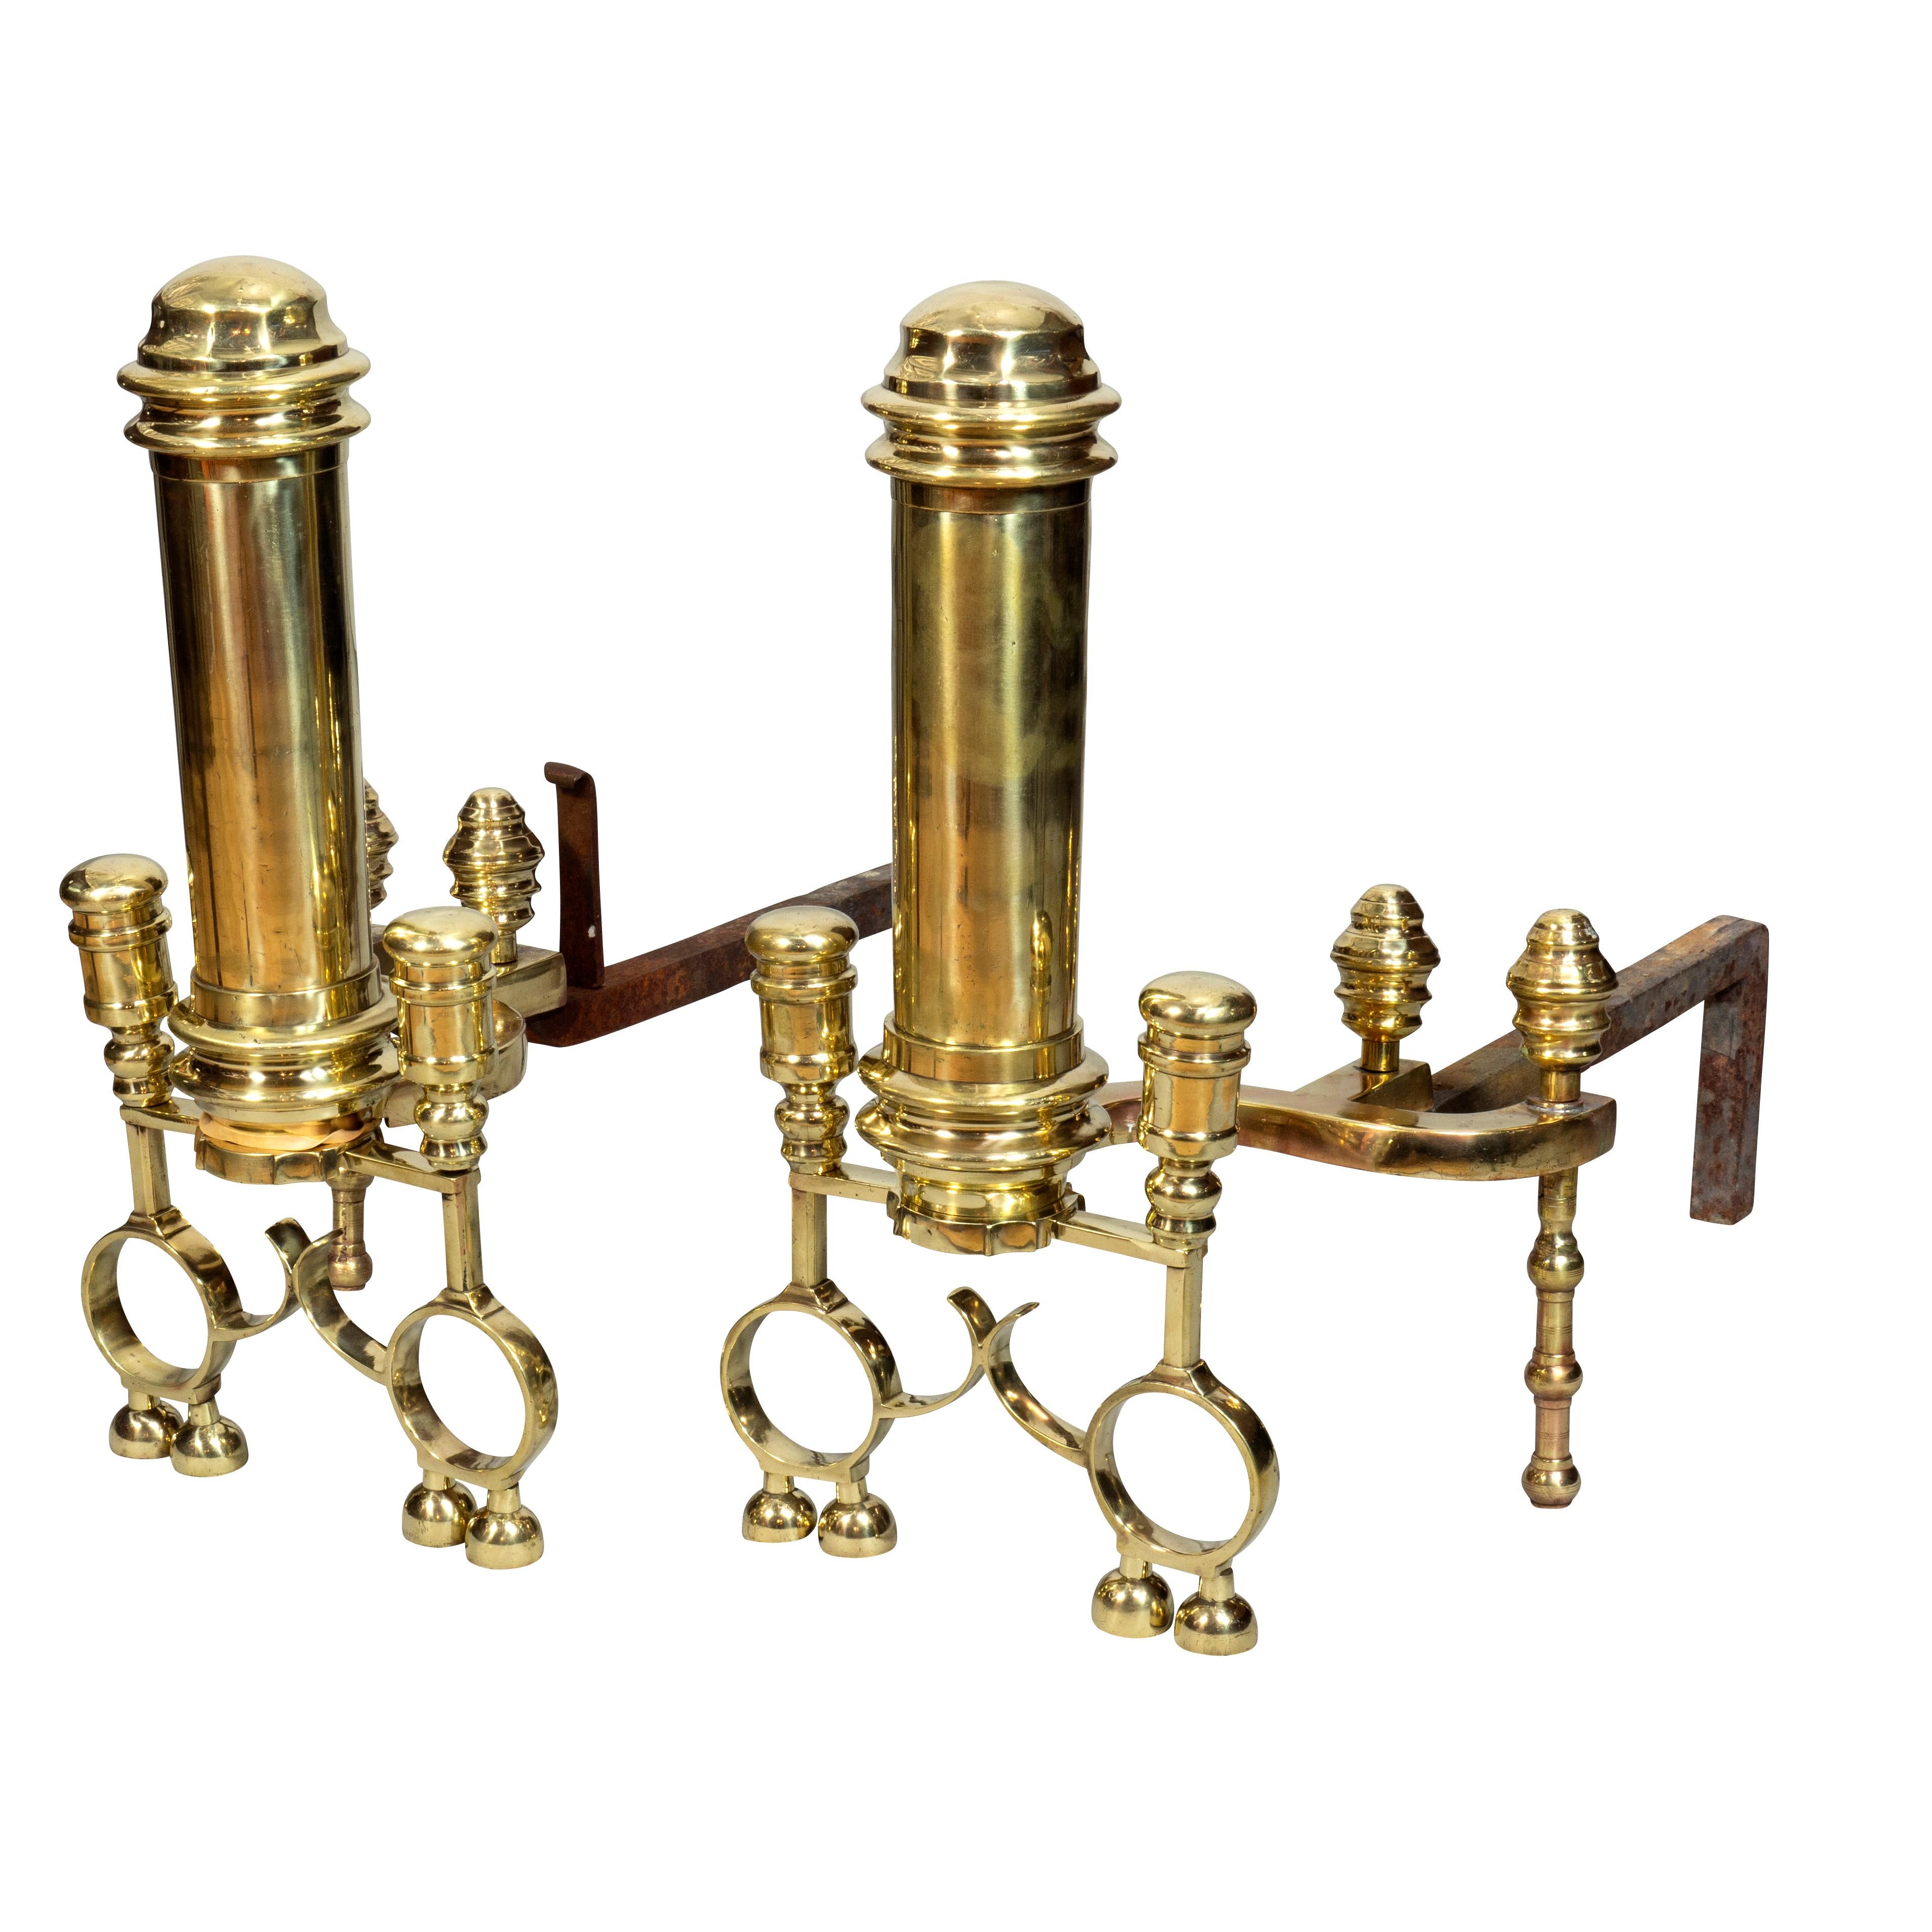 Mid-19th Century Pair of American Late Federal Brass Andirons For Sale